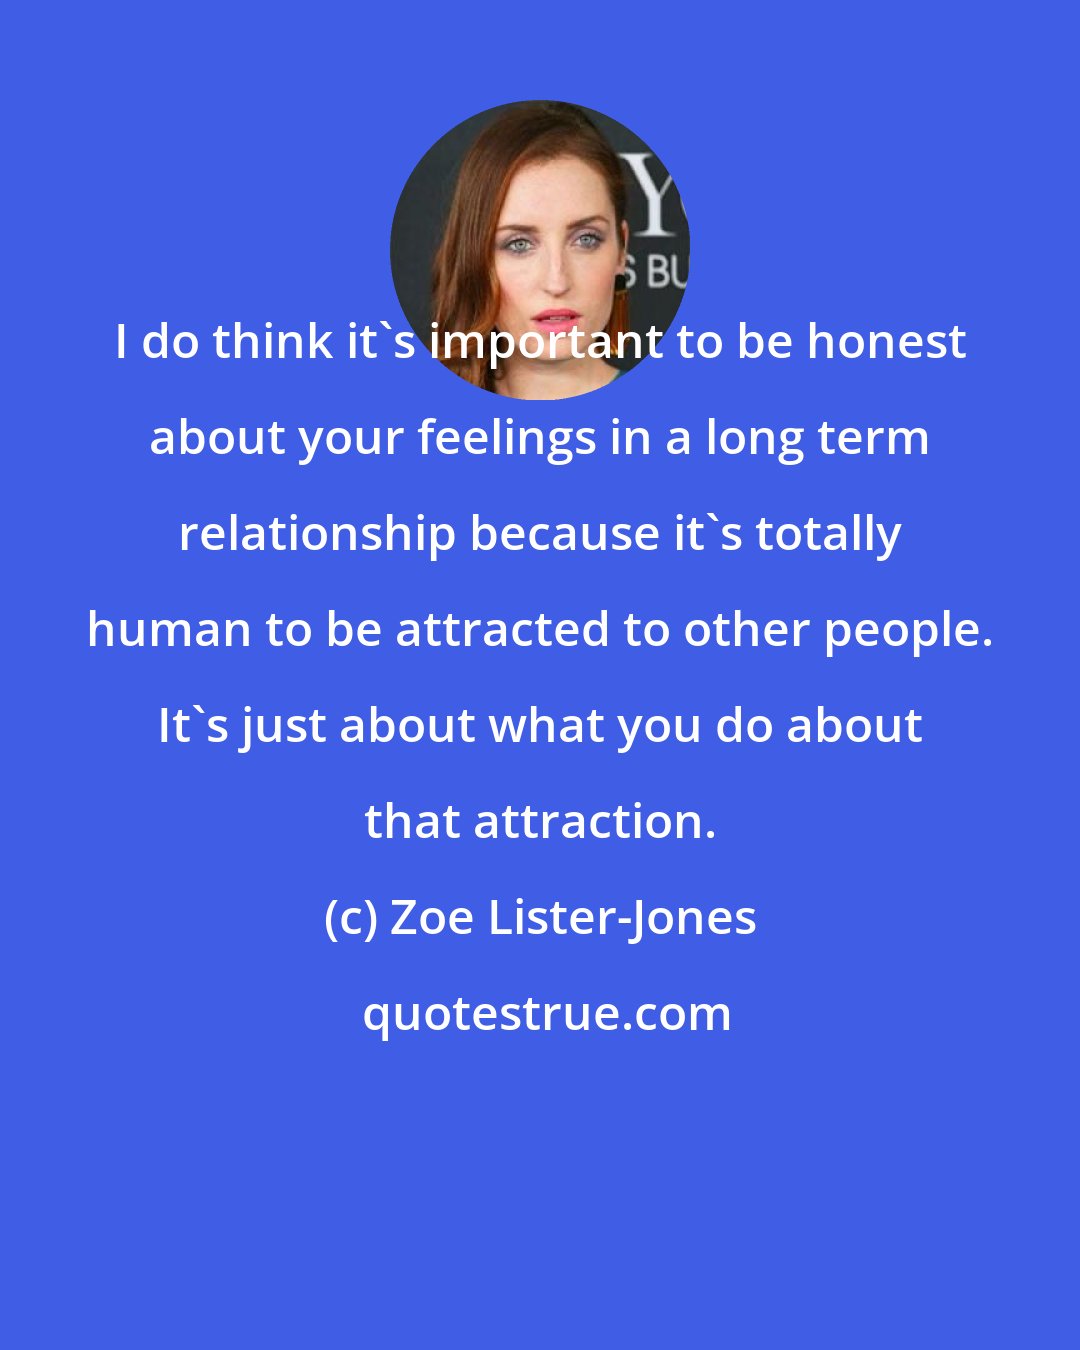 Zoe Lister-Jones: I do think it's important to be honest about your feelings in a long term relationship because it's totally human to be attracted to other people. It's just about what you do about that attraction.